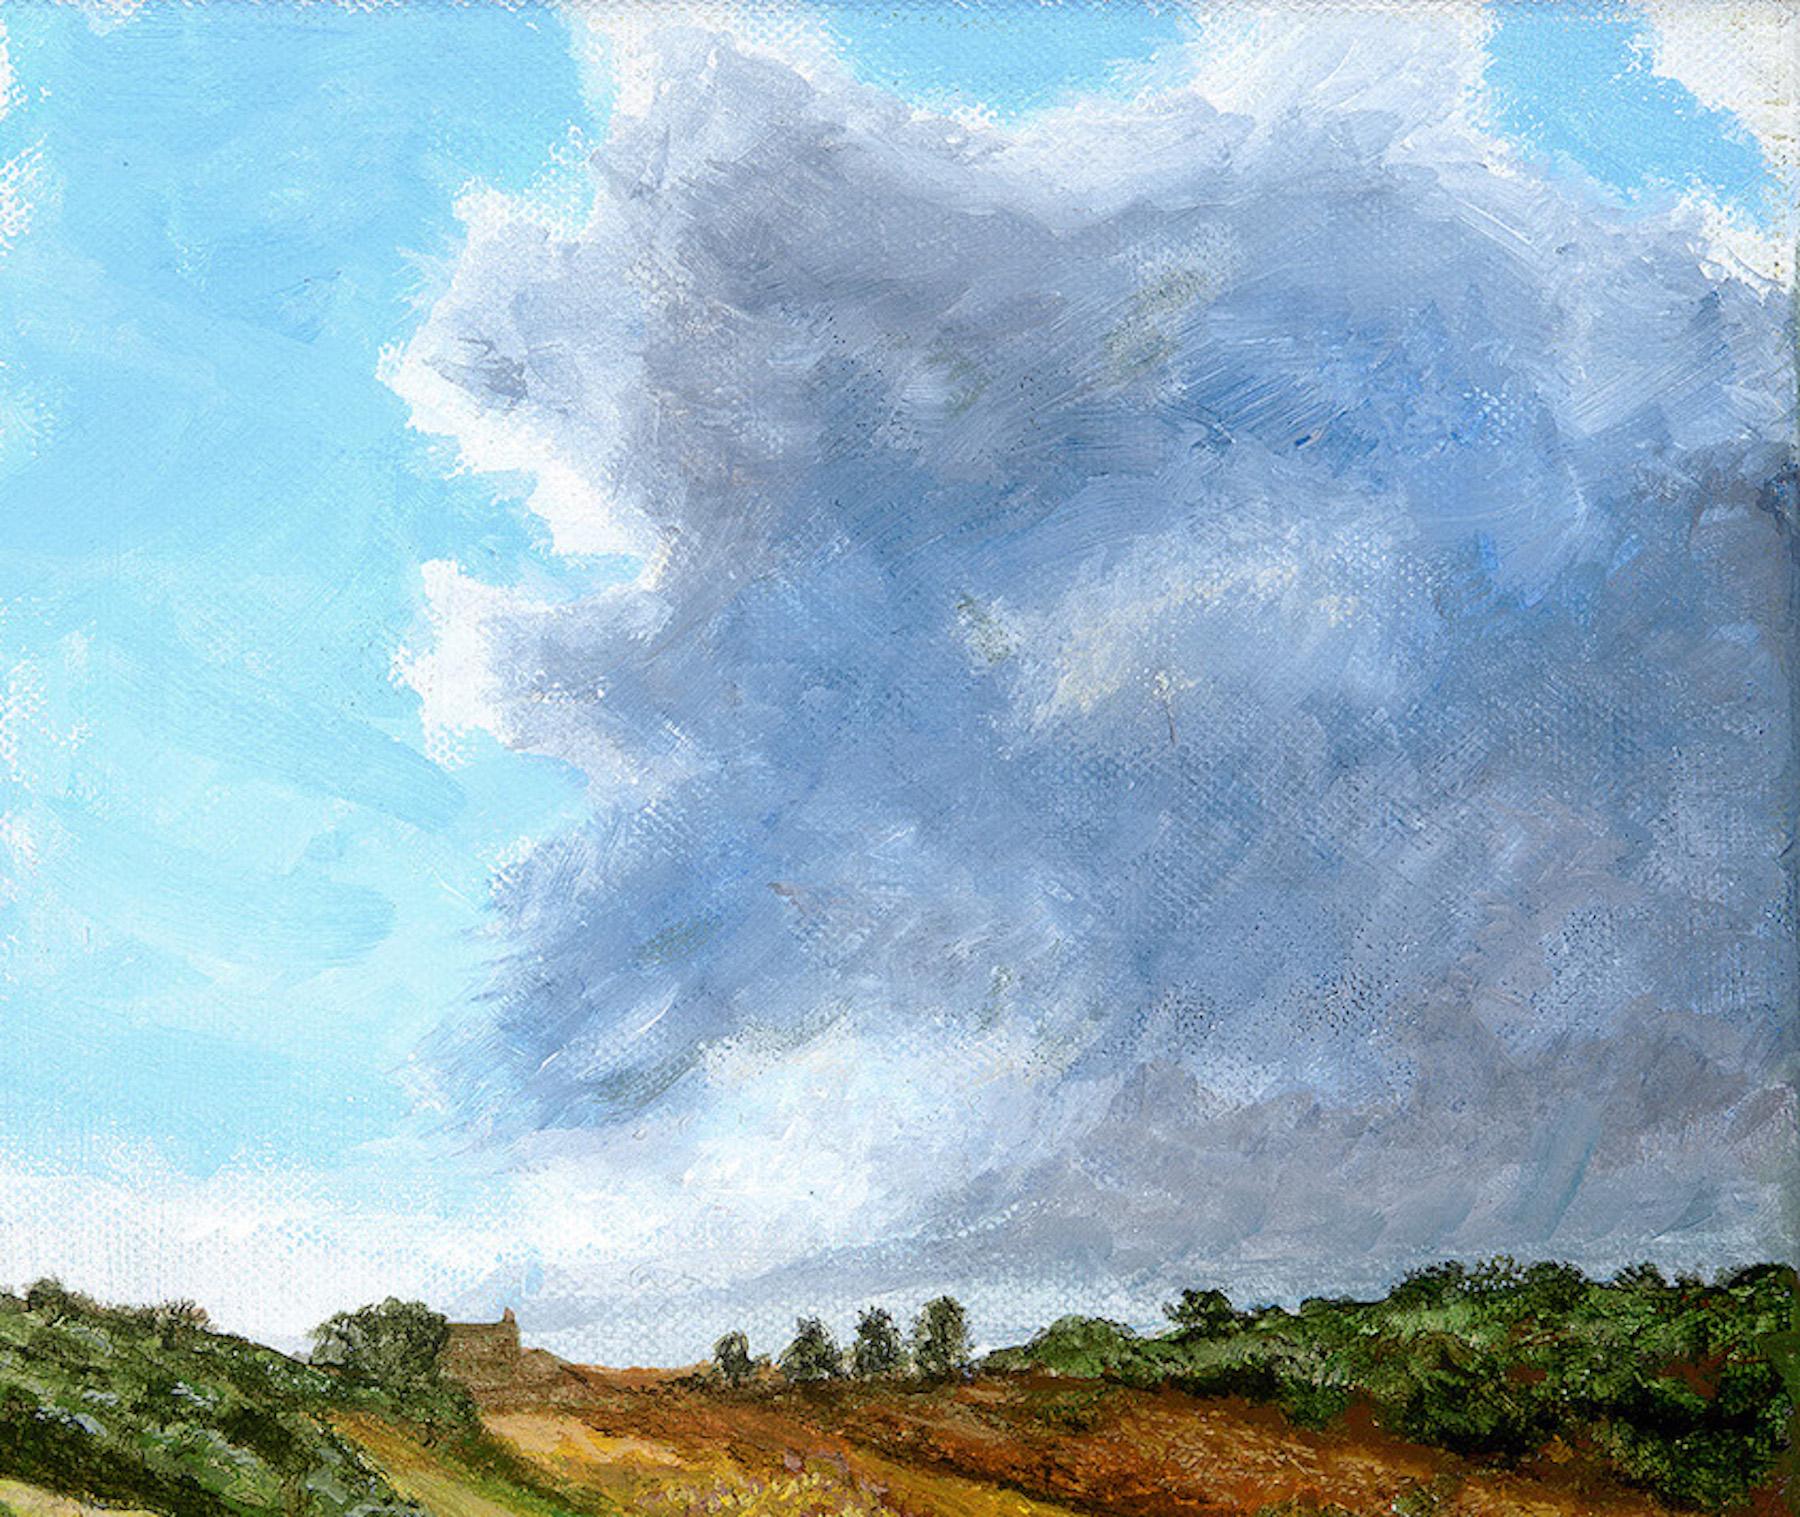 Gathering clouds over meadow [2019]

Sheep grazing in a field with clouds gathering overhead. This was in North Yorkshire near the coast.

Additional information:
Original
Acrylic painting
Image size: H 30 cm x W 30 cm
Complete Size of Unframed